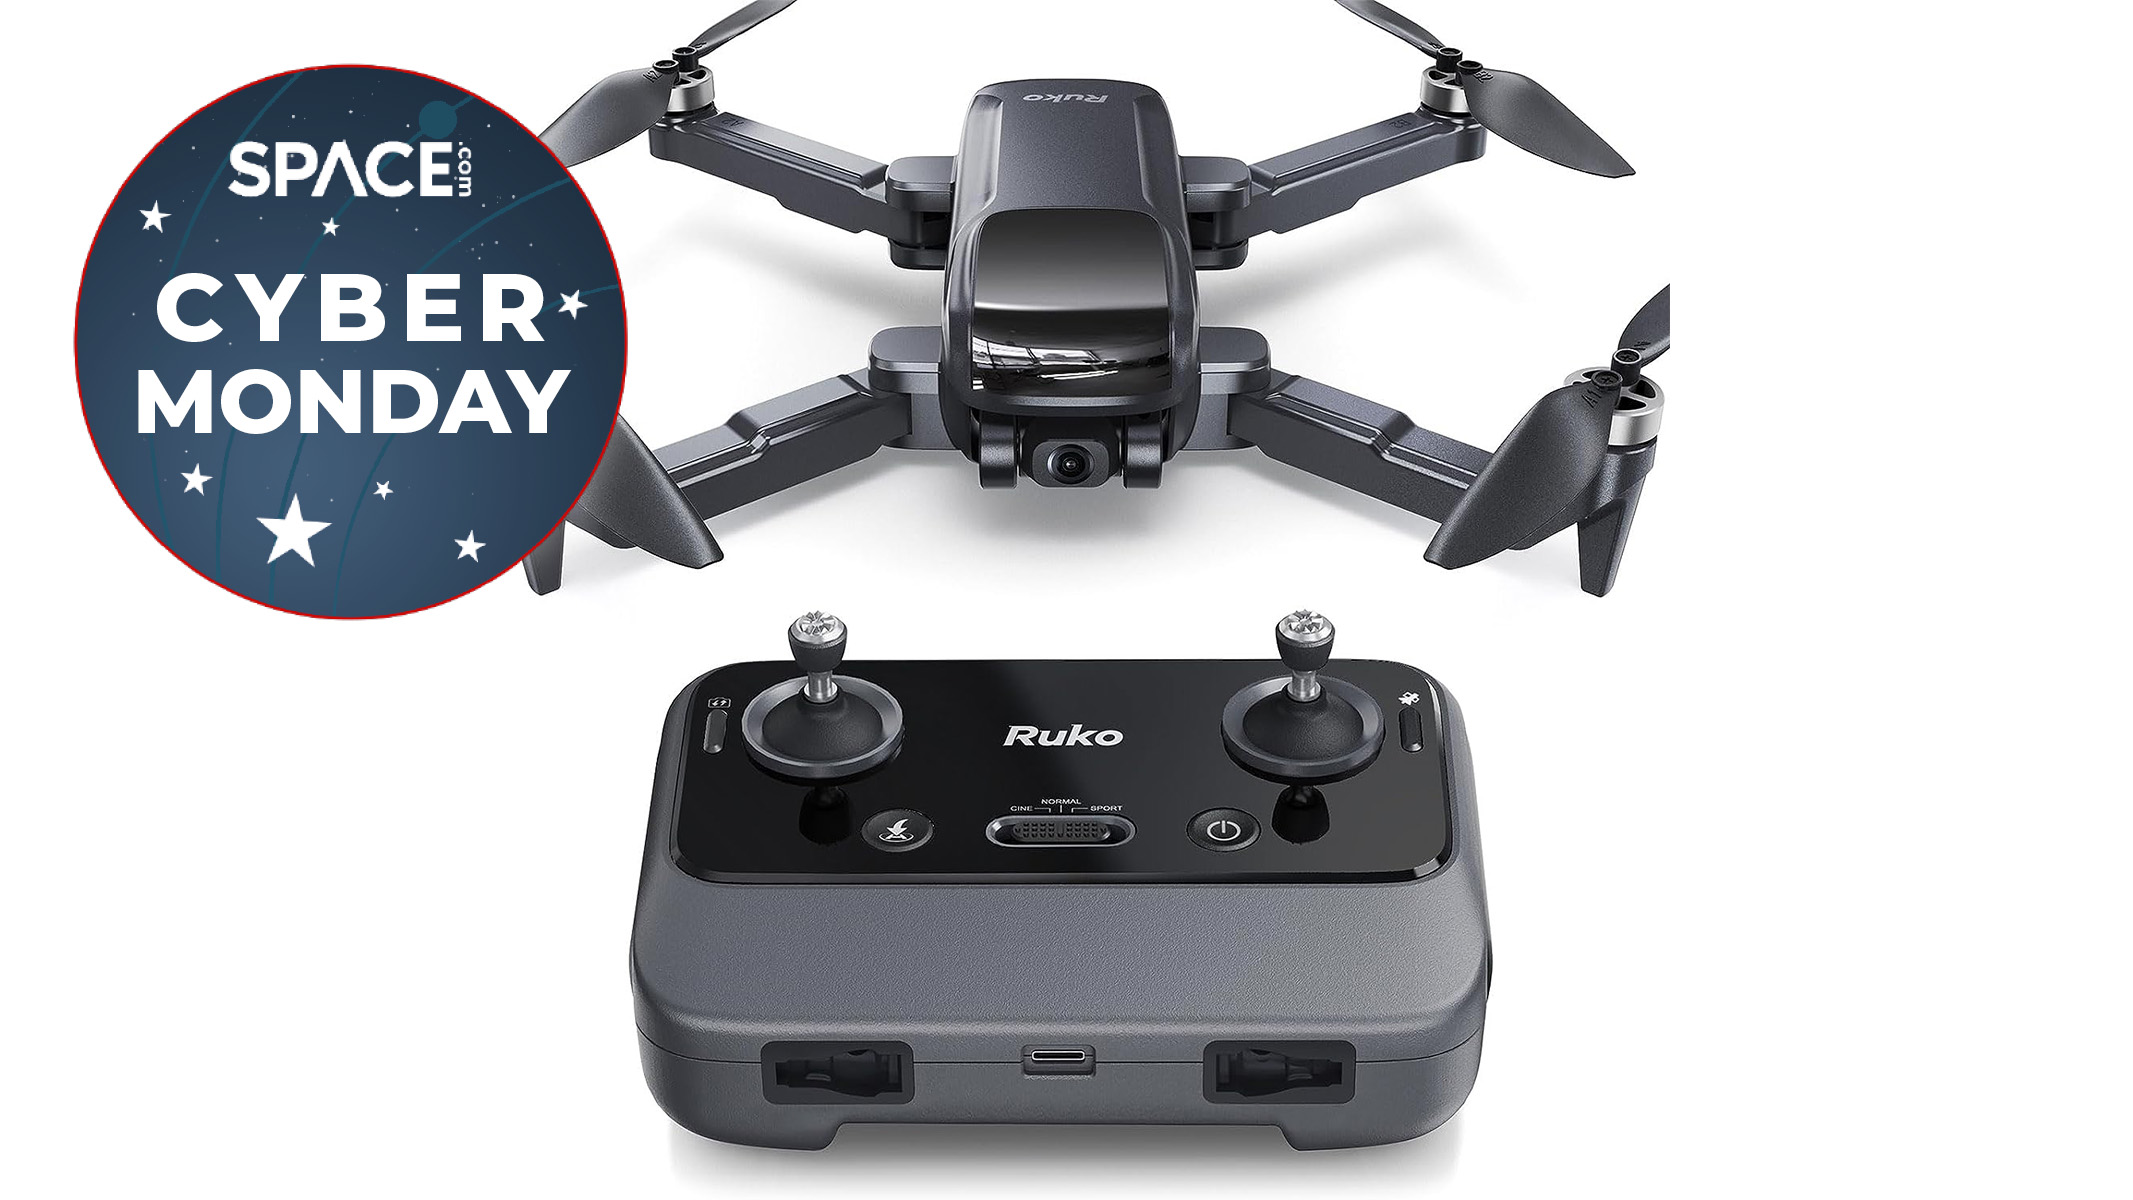 This huge Cyber Monday deal can net you an excellent drone for almost half price Space